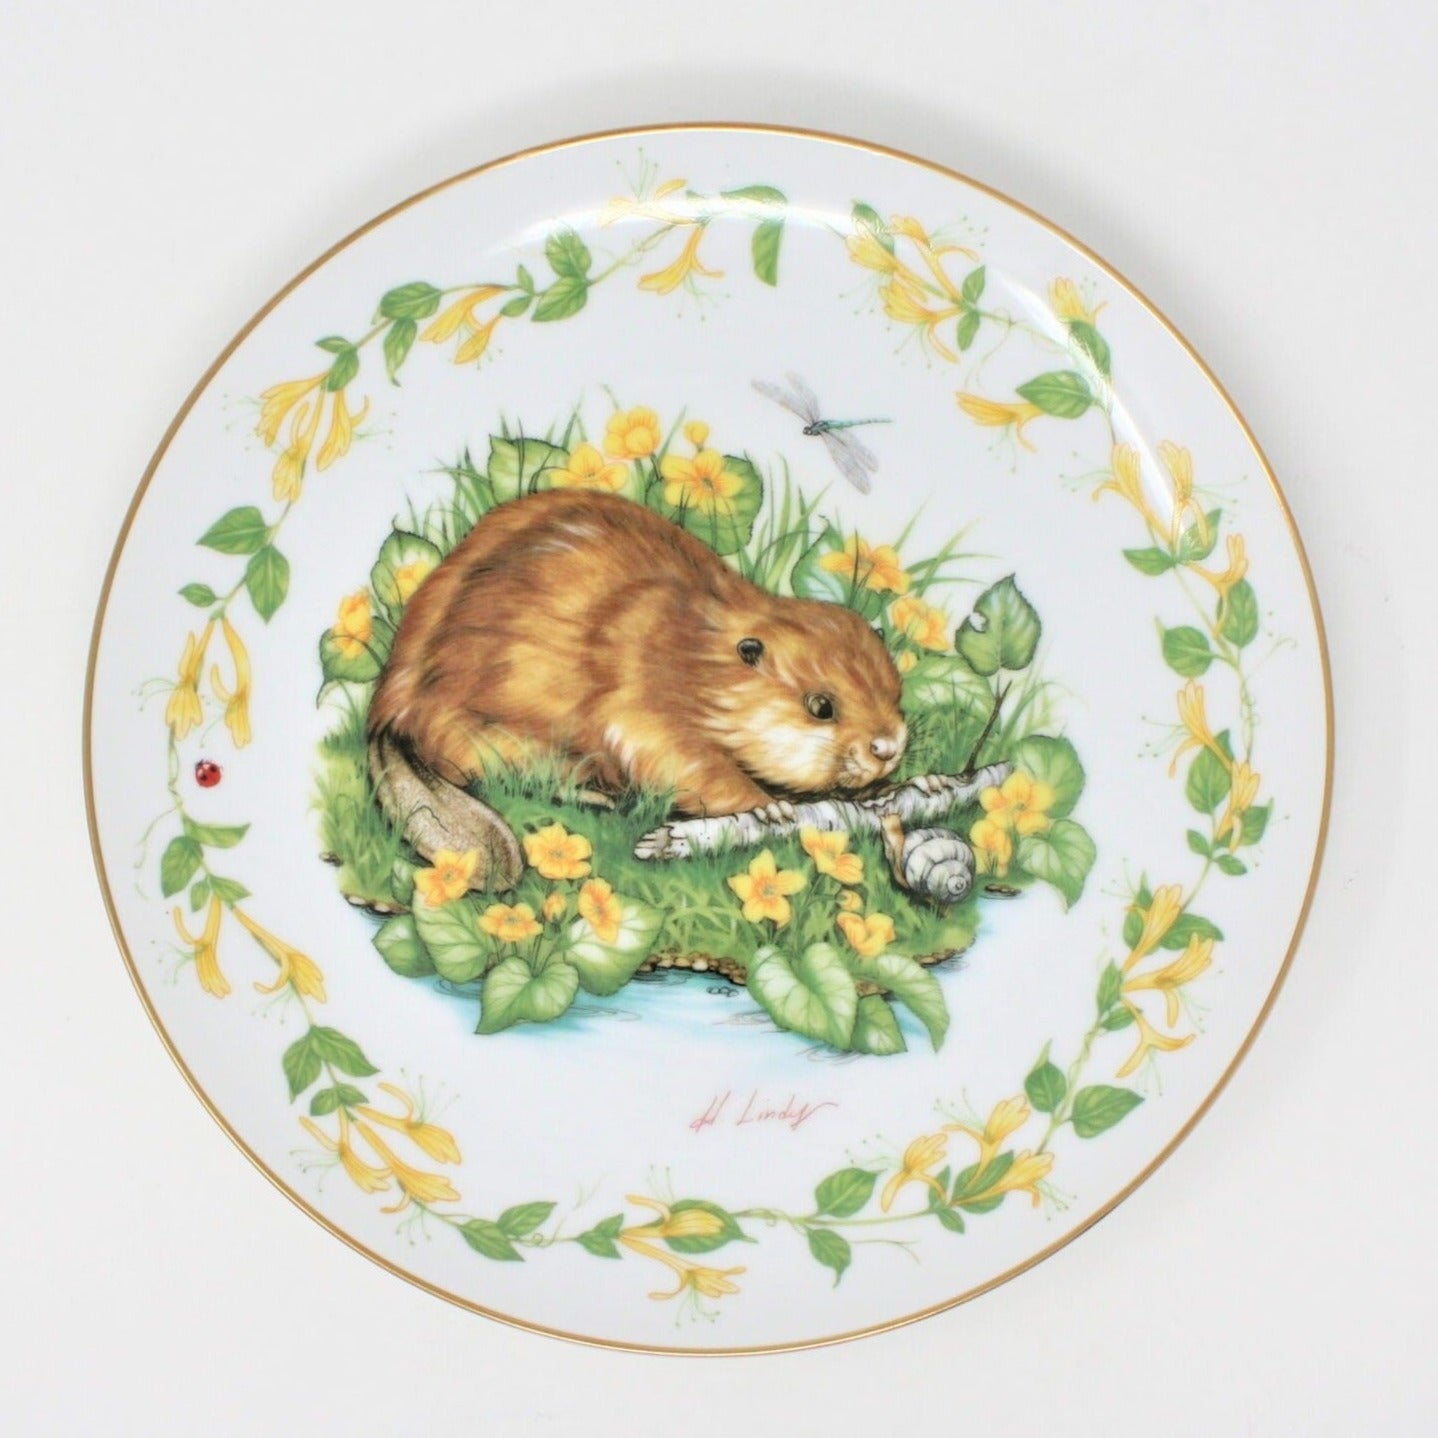 Decorative Plate, Royal Cornwall, Woodland Babies, Just Learning, Vintage